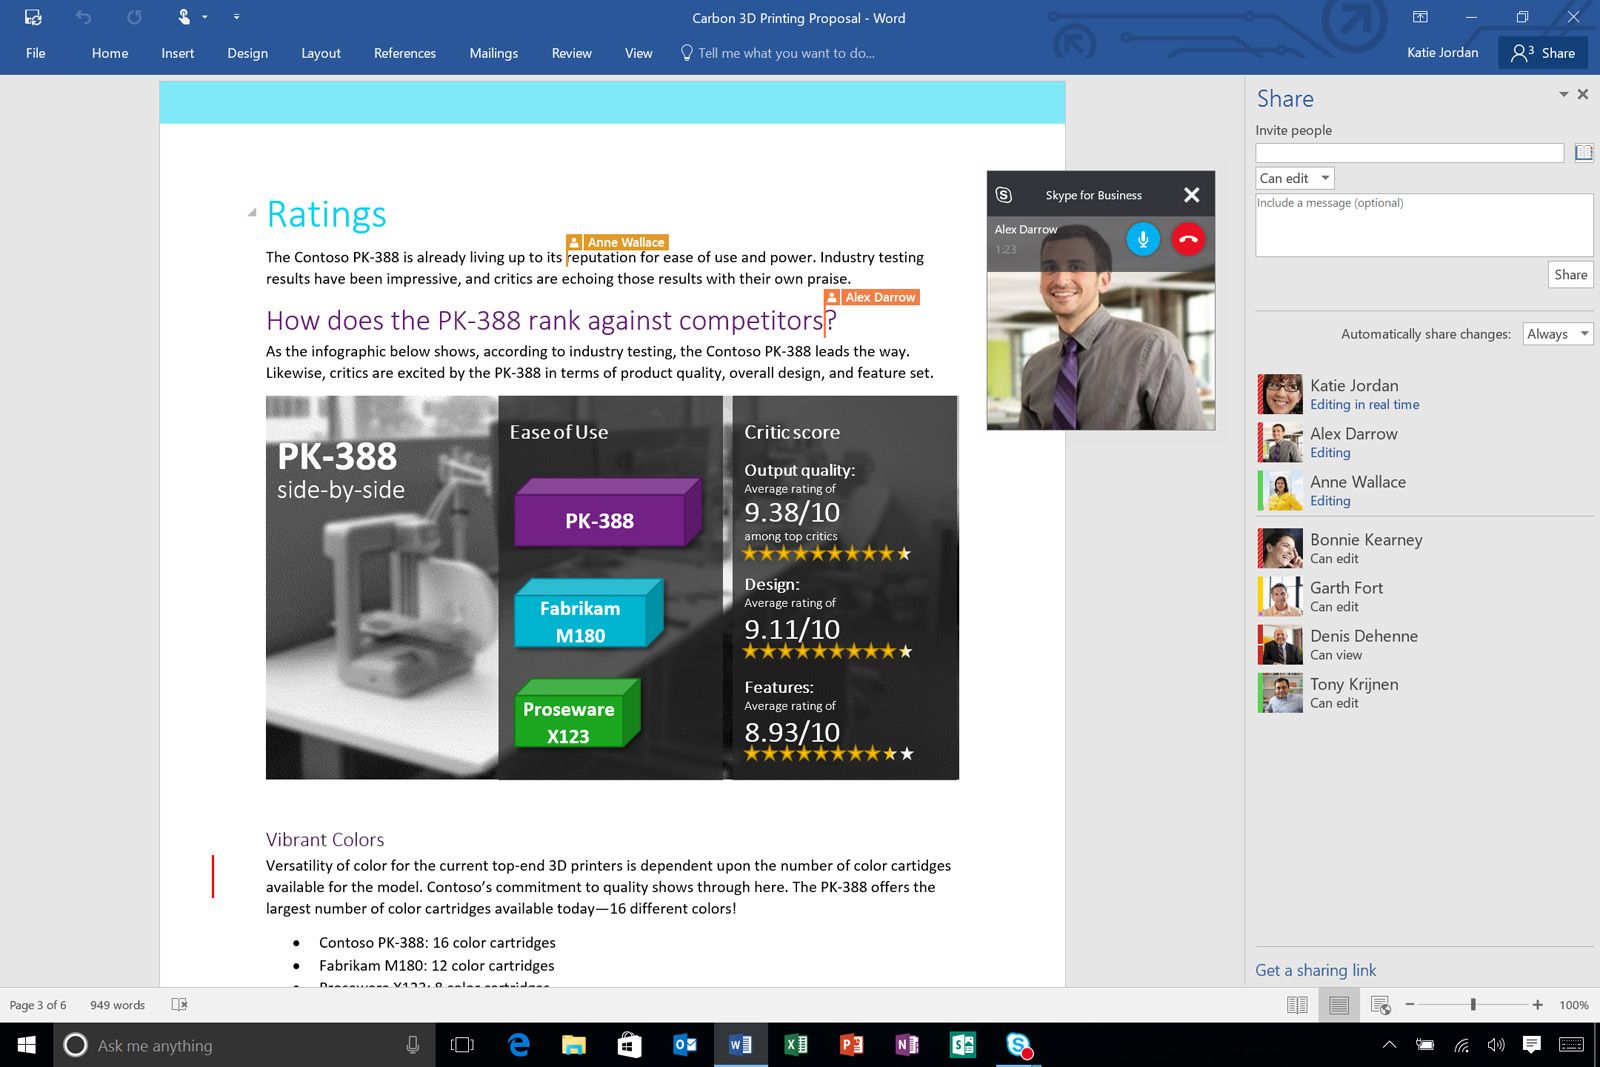 office 2016 for windows 10 now available how to get it and key new features explained image 6